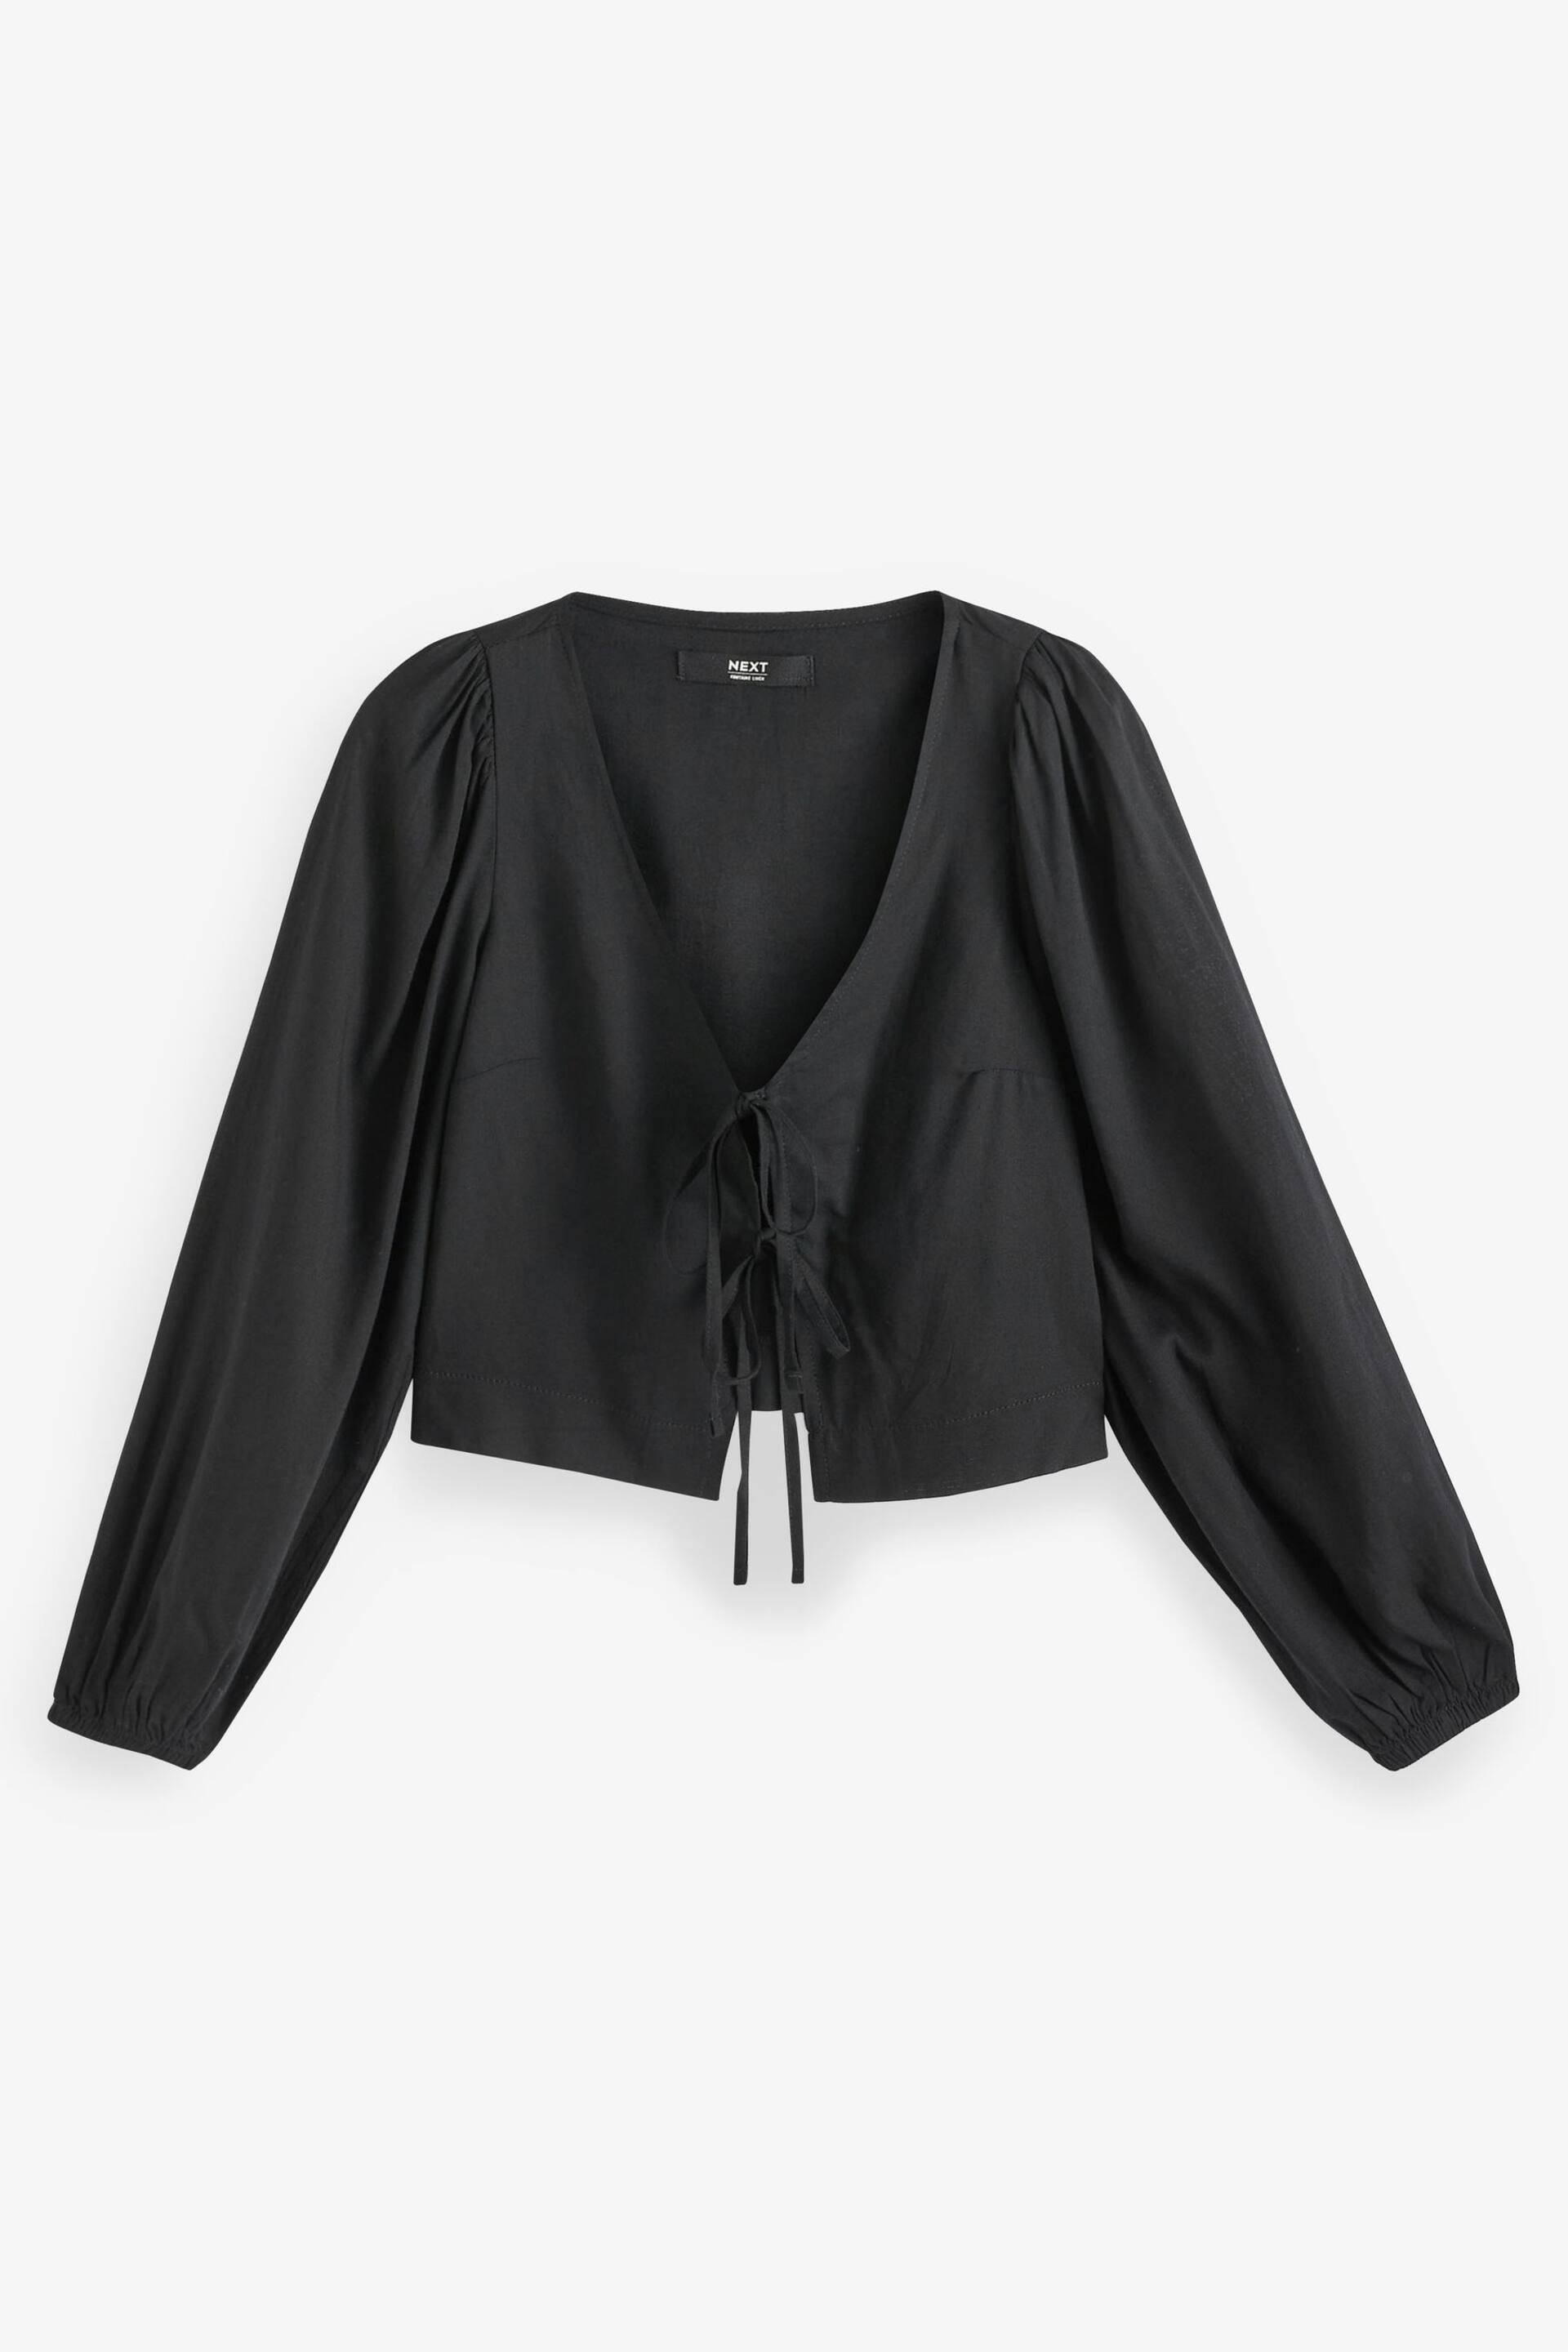 Black Tie Front Blouse with Linen - Image 5 of 6